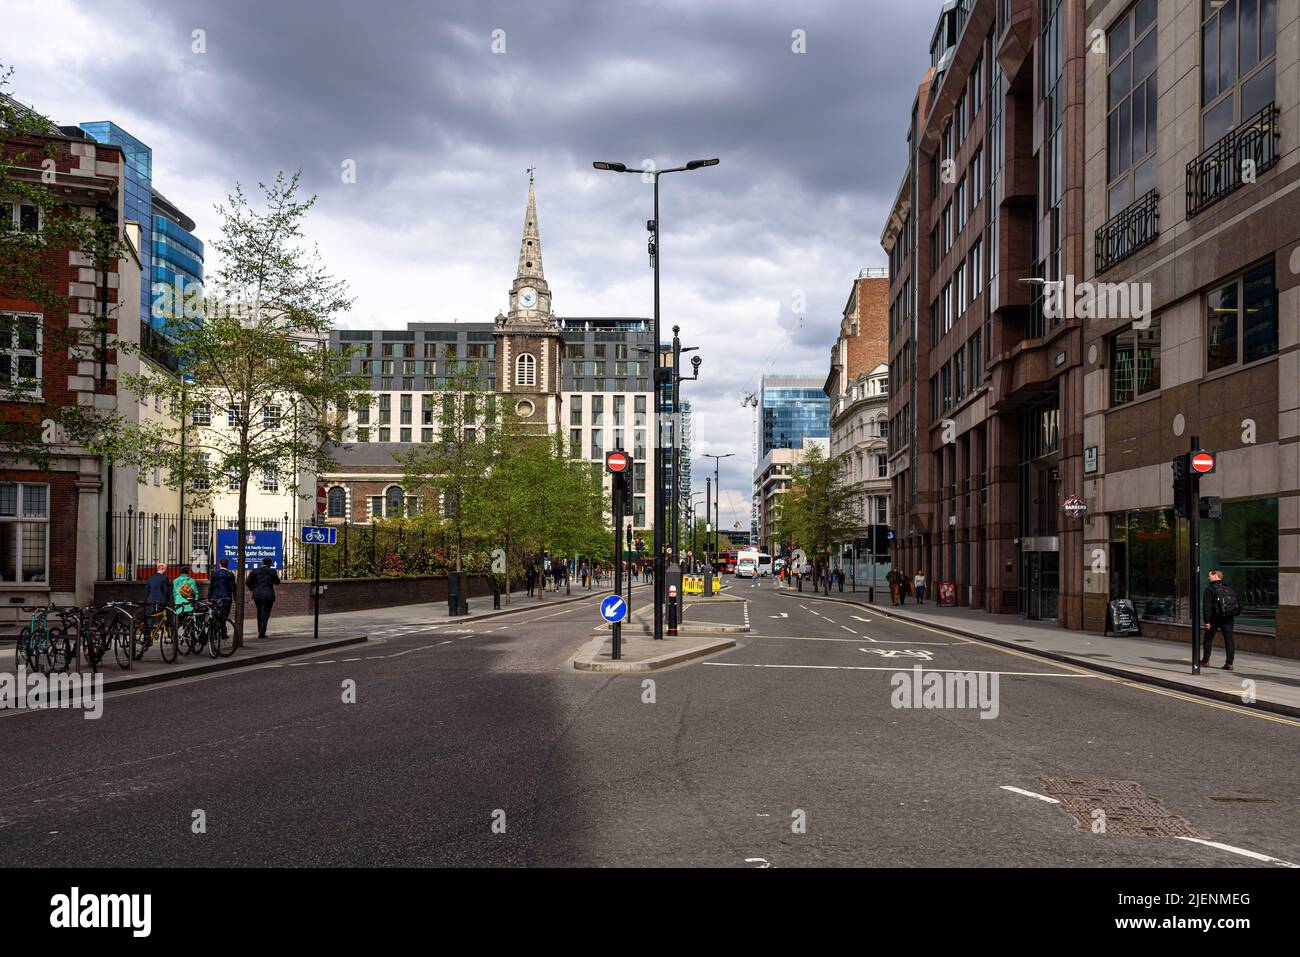 Aldgate High Street in the City of London on a spring day Stock Photo